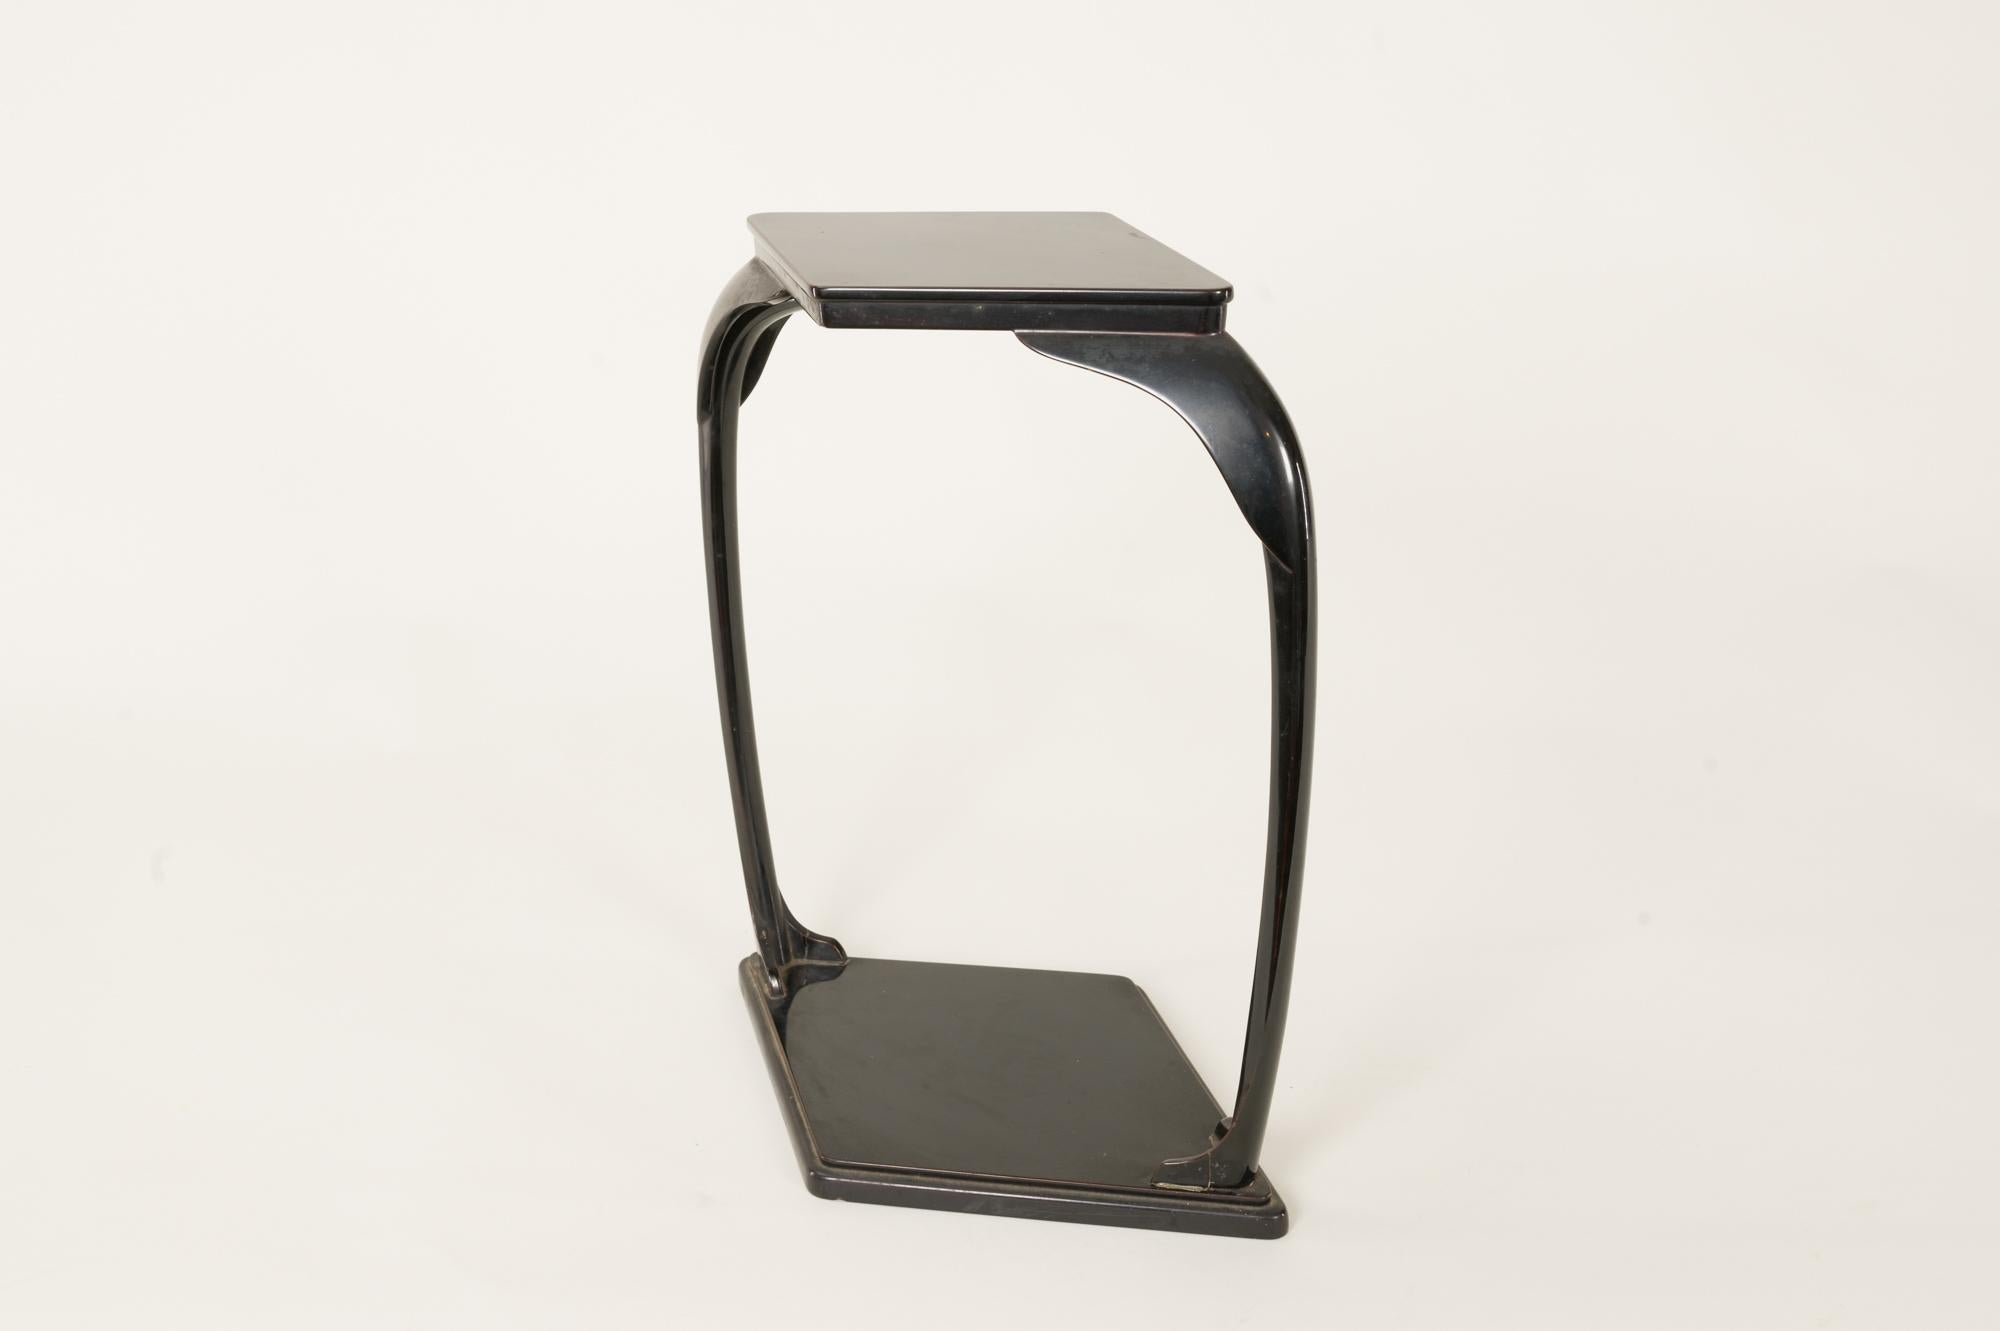 Originally made for presenting a small treasure, this stand has a diamond shape and is made of characteristic Japanese deep black lacquer with brown tones.